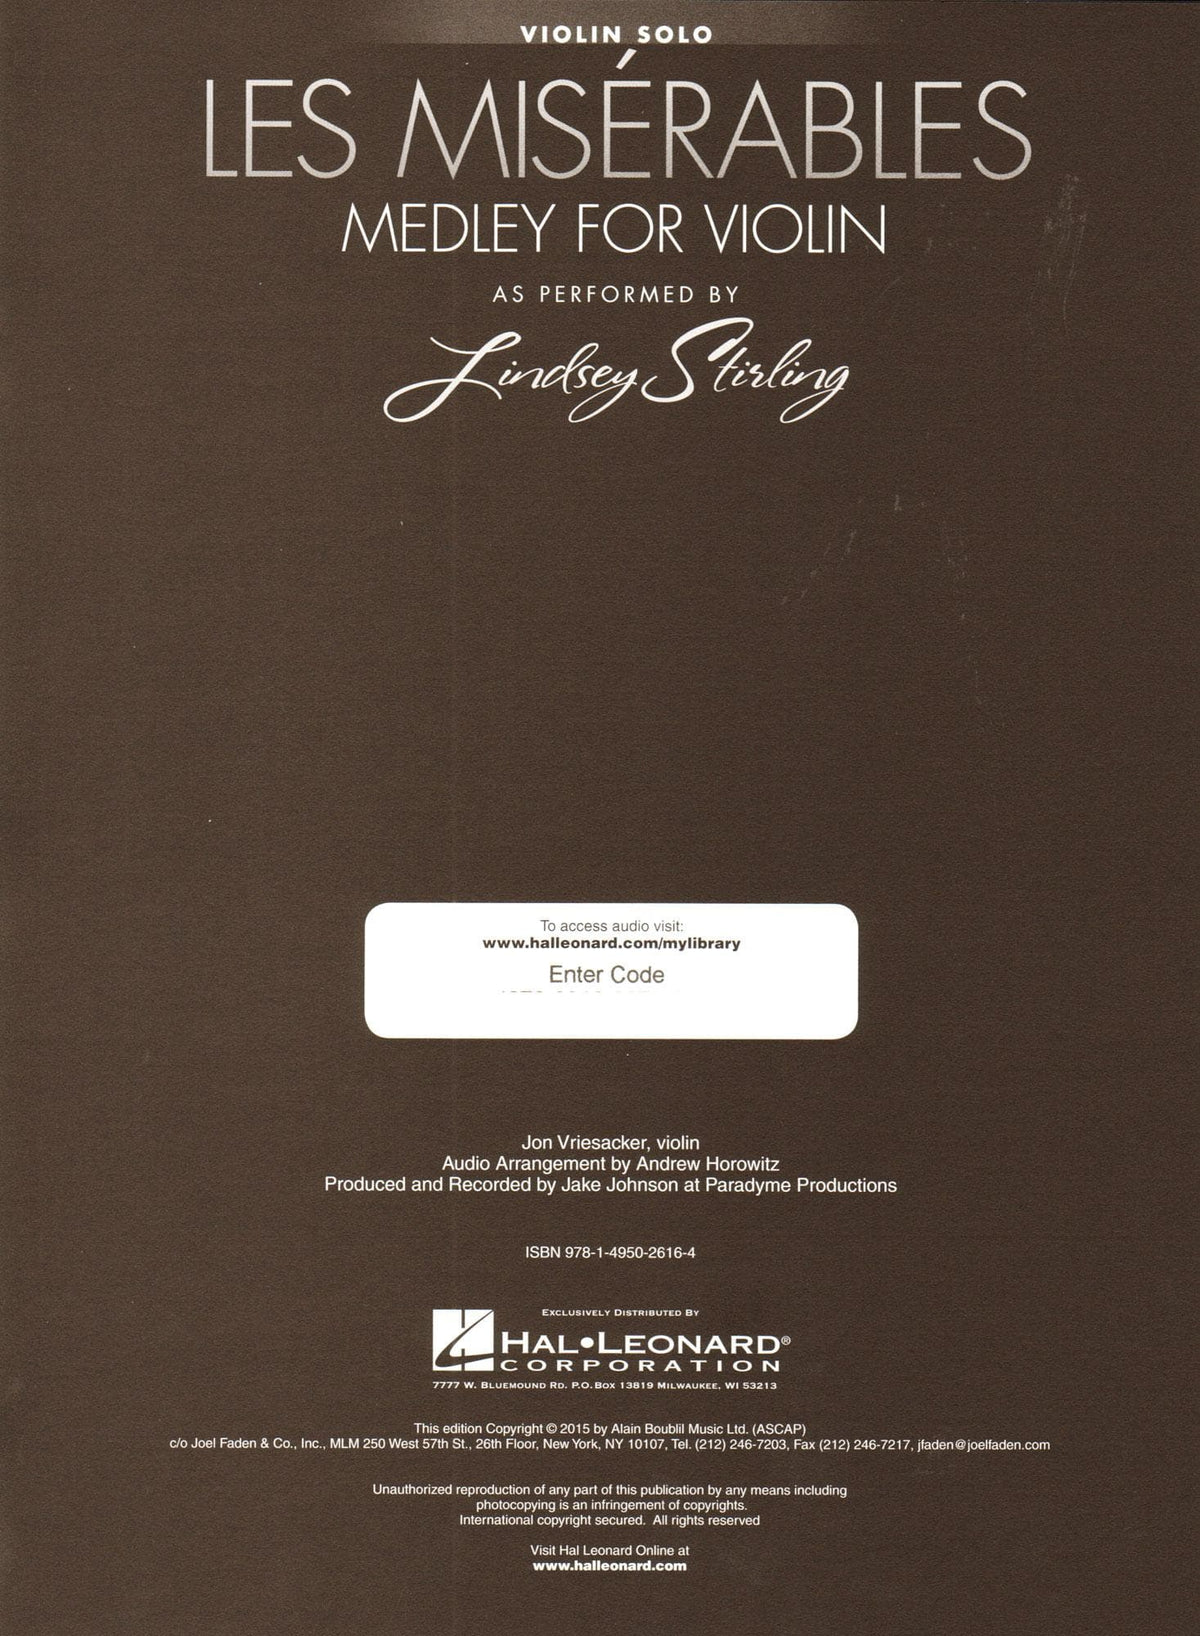 Les Misérables - Medley for Violin with Audio Accompaniment - as Performed by Lindsey Stirling - Hal Leonard